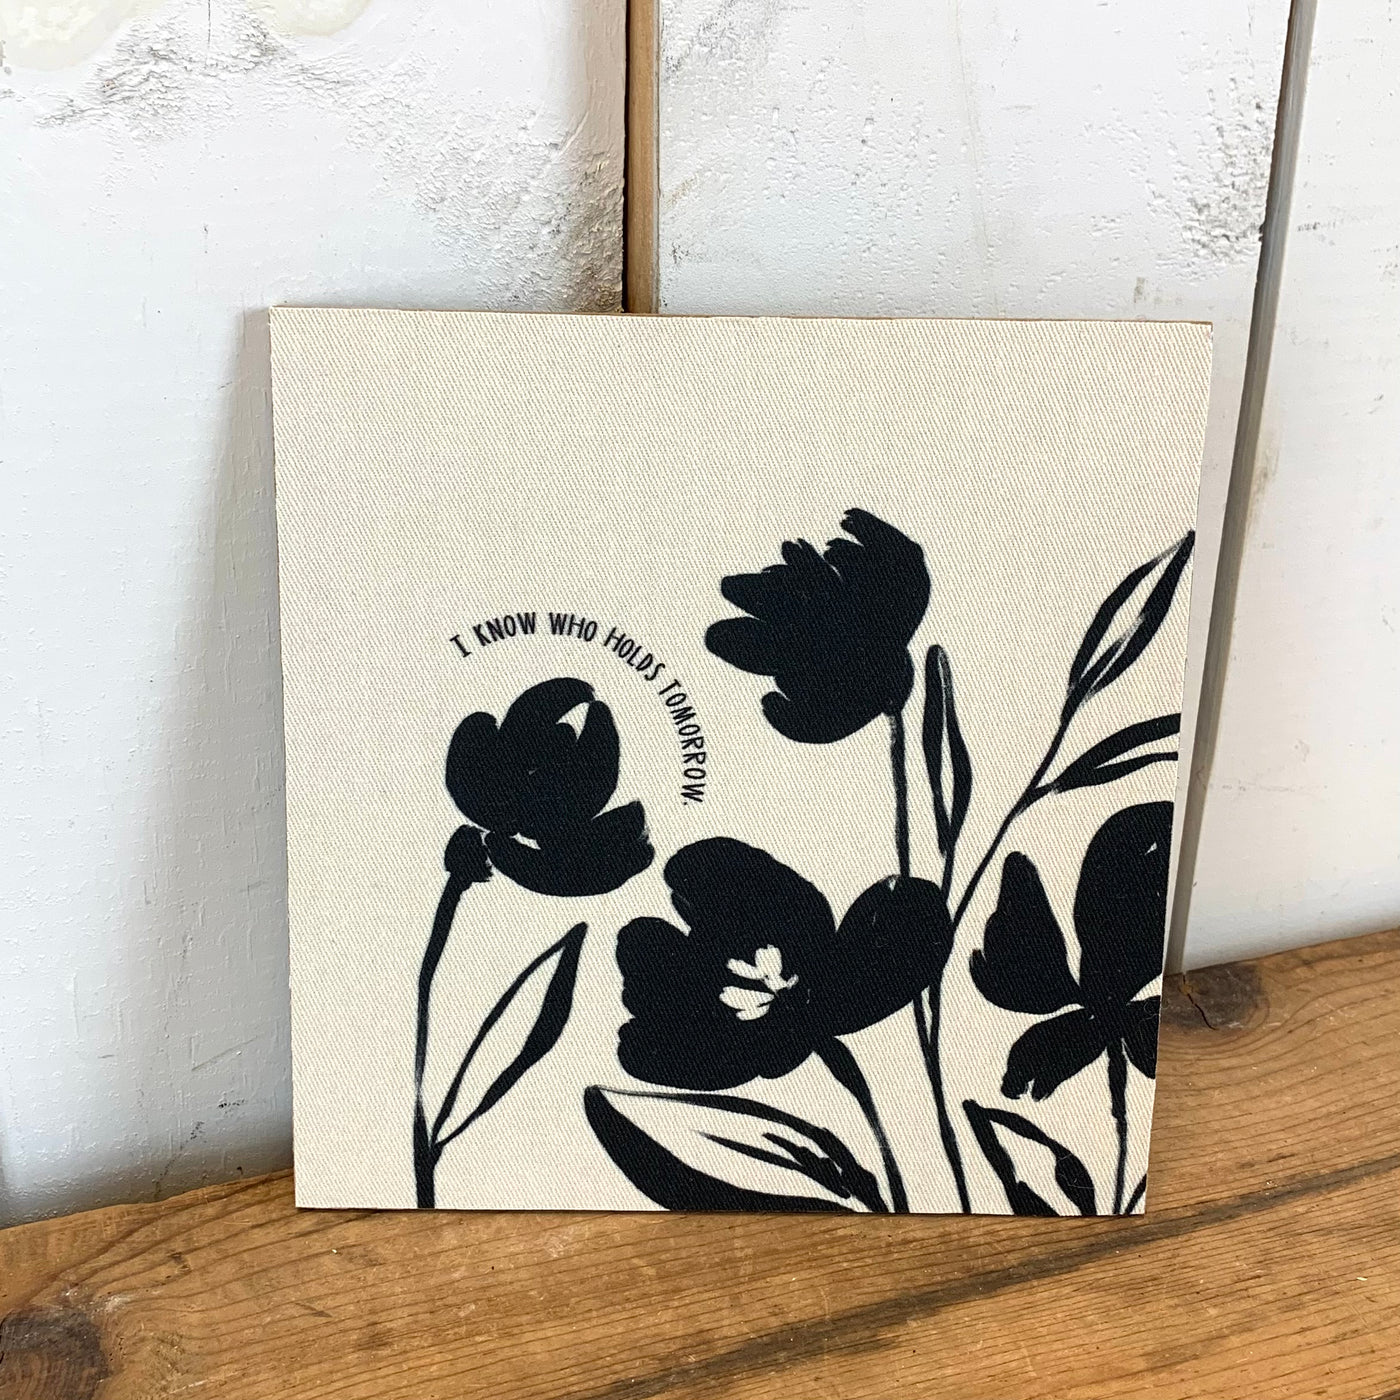 7" x 7" Canvases